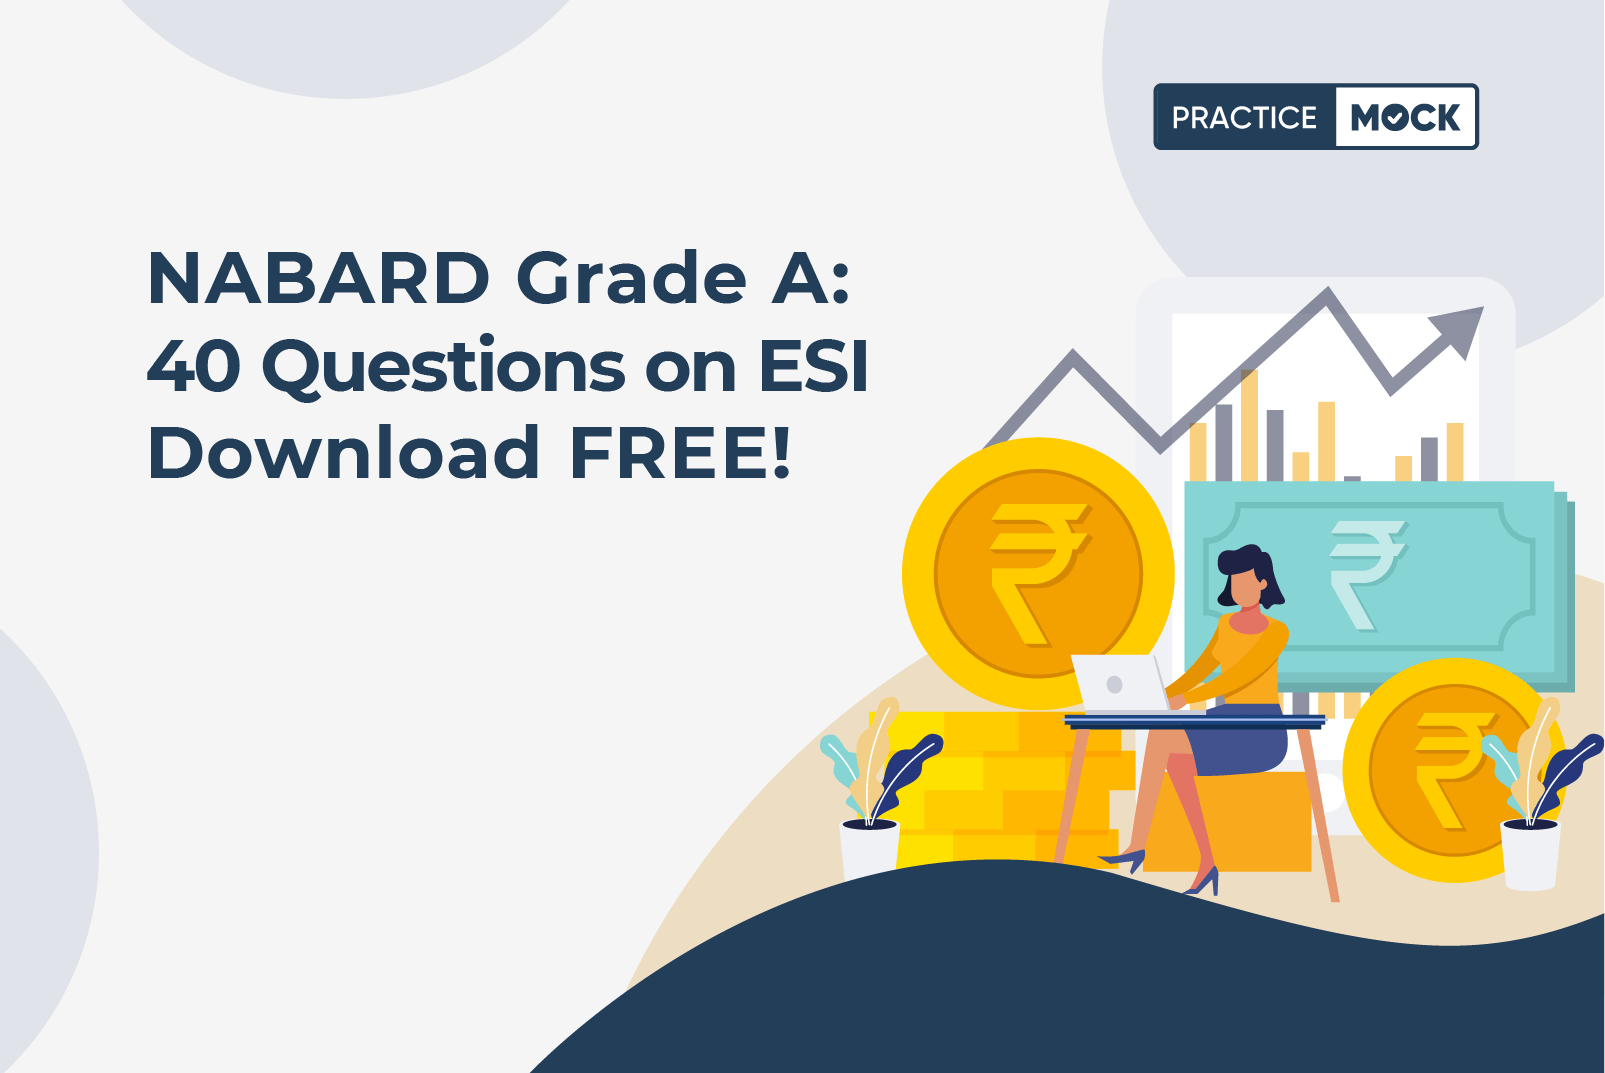 NABARD Grade A 40 Questions on ESI Download FREE!